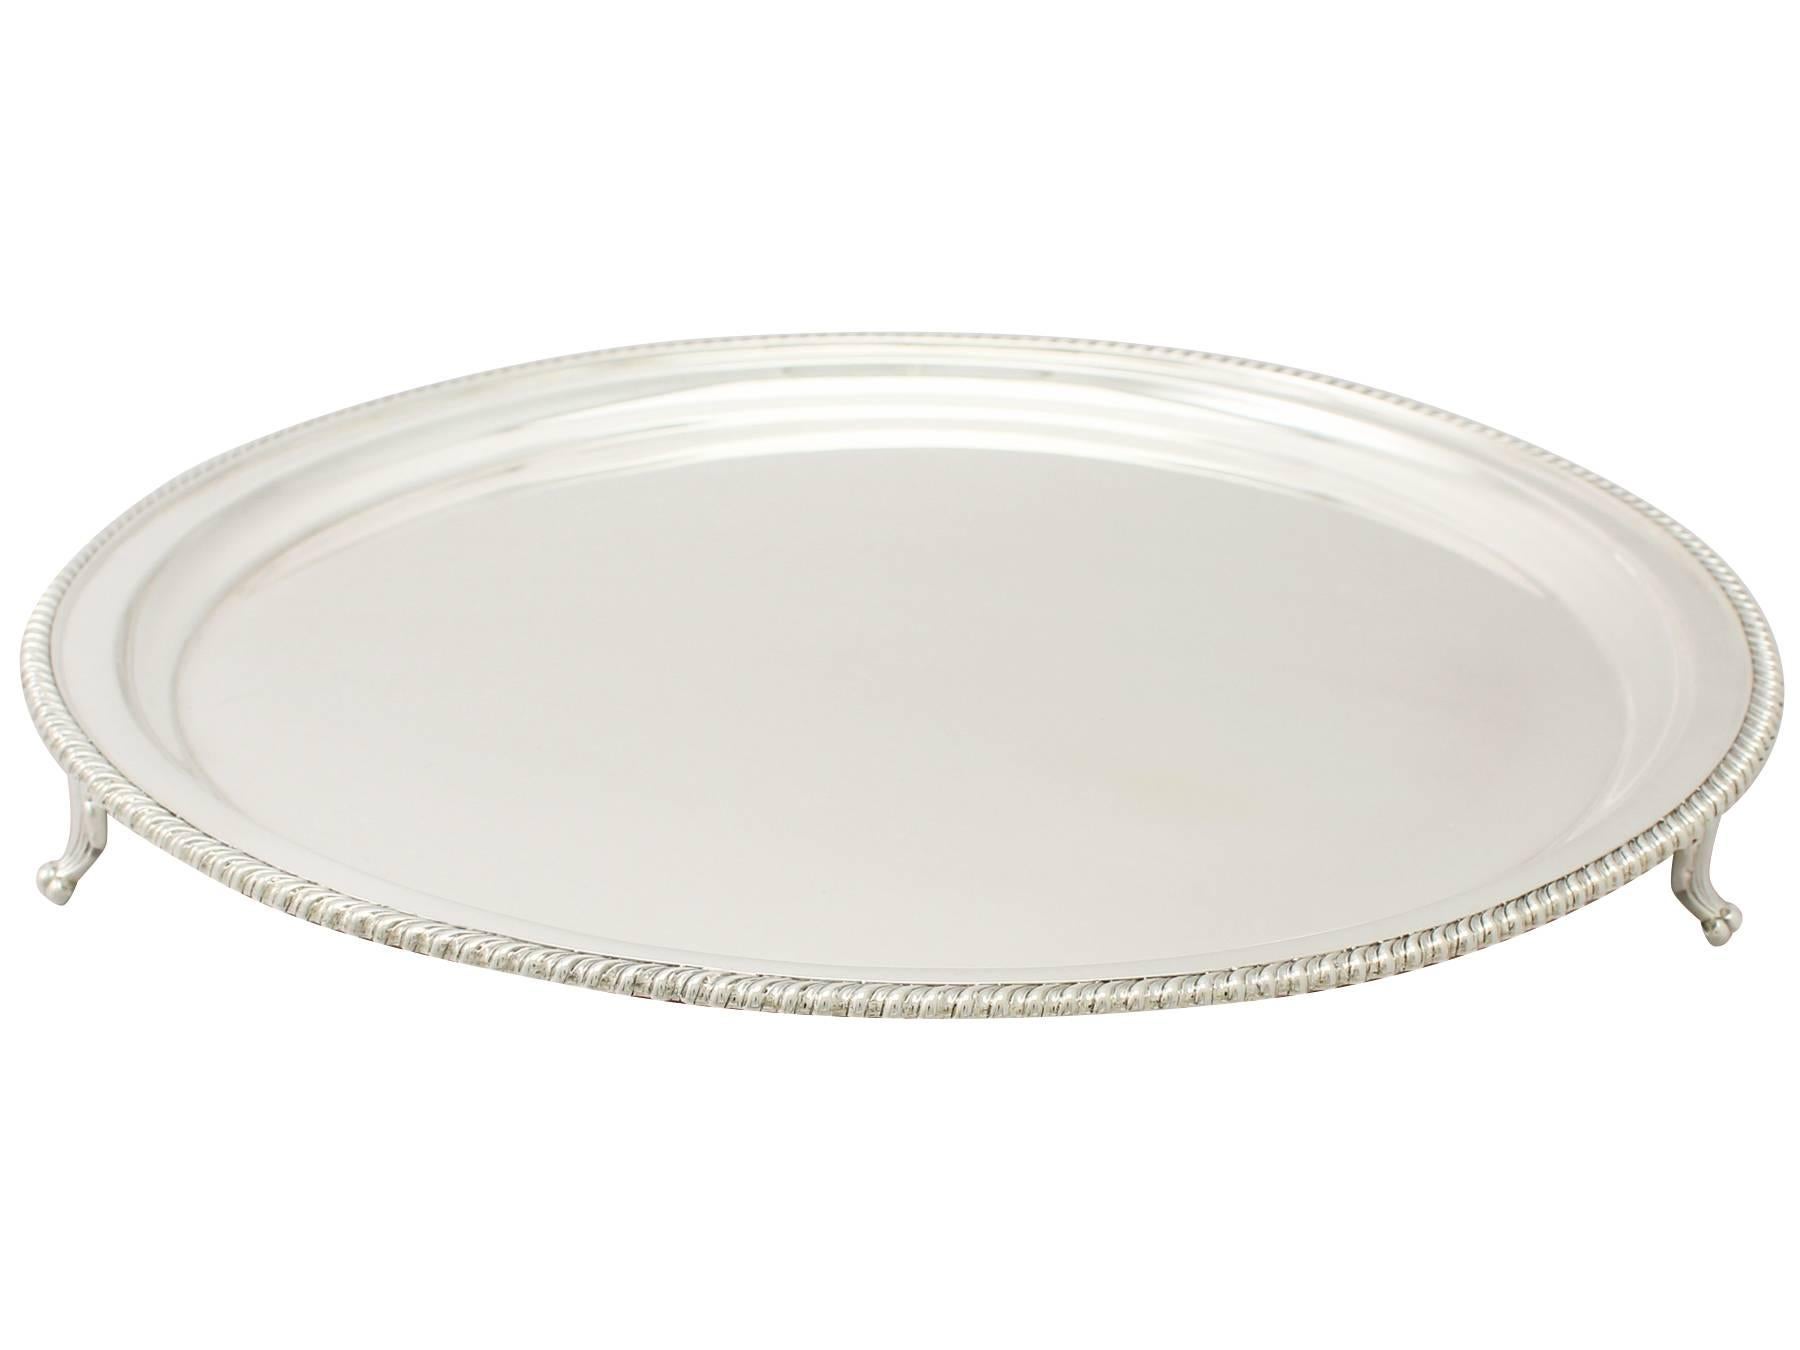 A fine and impressive antique George VI English sterling silver salver; an addition to our range of silver trays and salvers.

This exceptional antique George VI sterling silver presentation salver has a plain circular form.

The surface of this